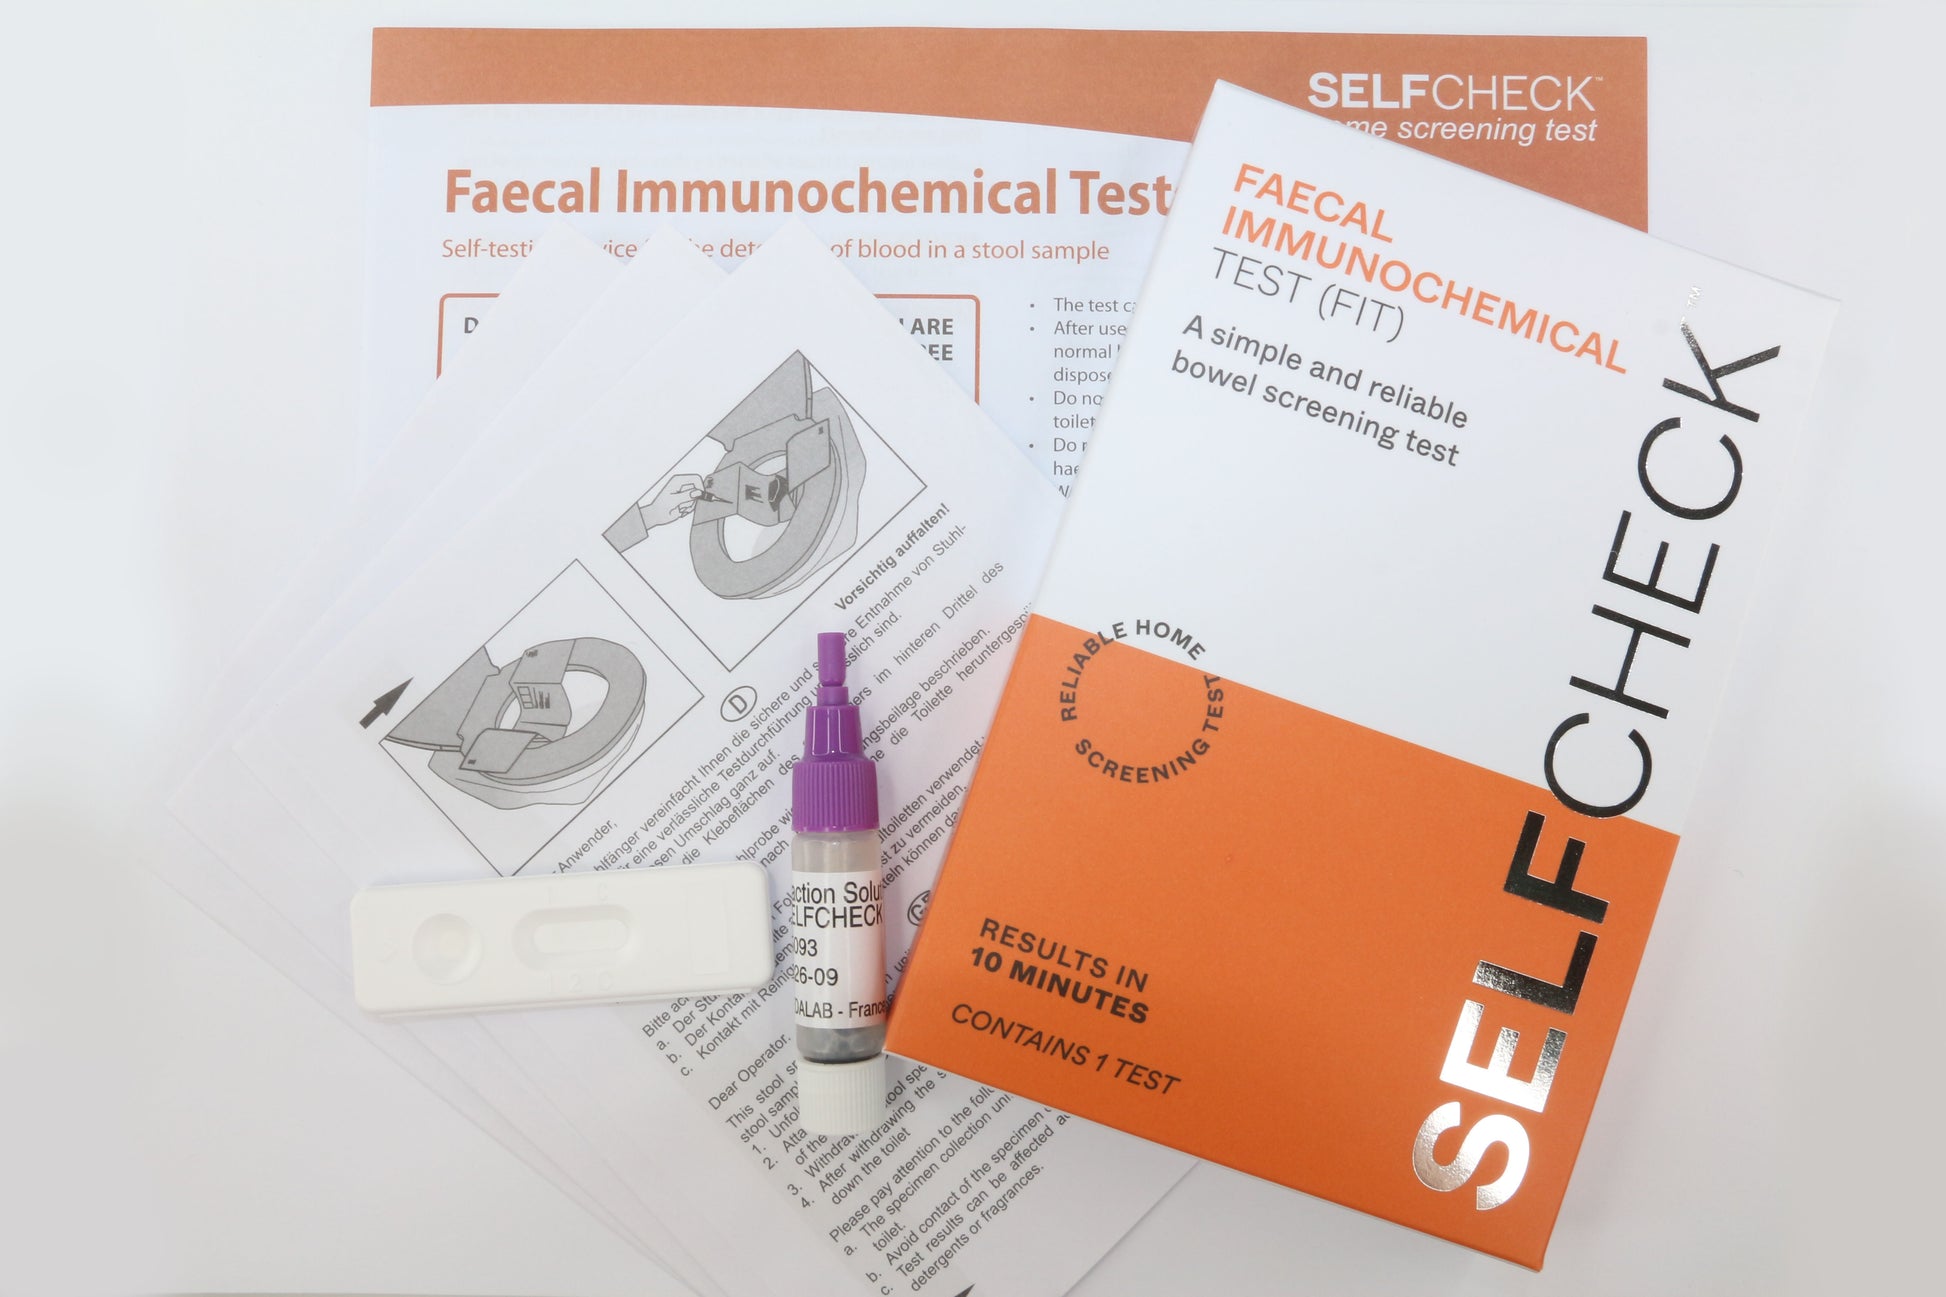 SELFCHECK Faecal Immunochemical Test (FIT) showing kit contents